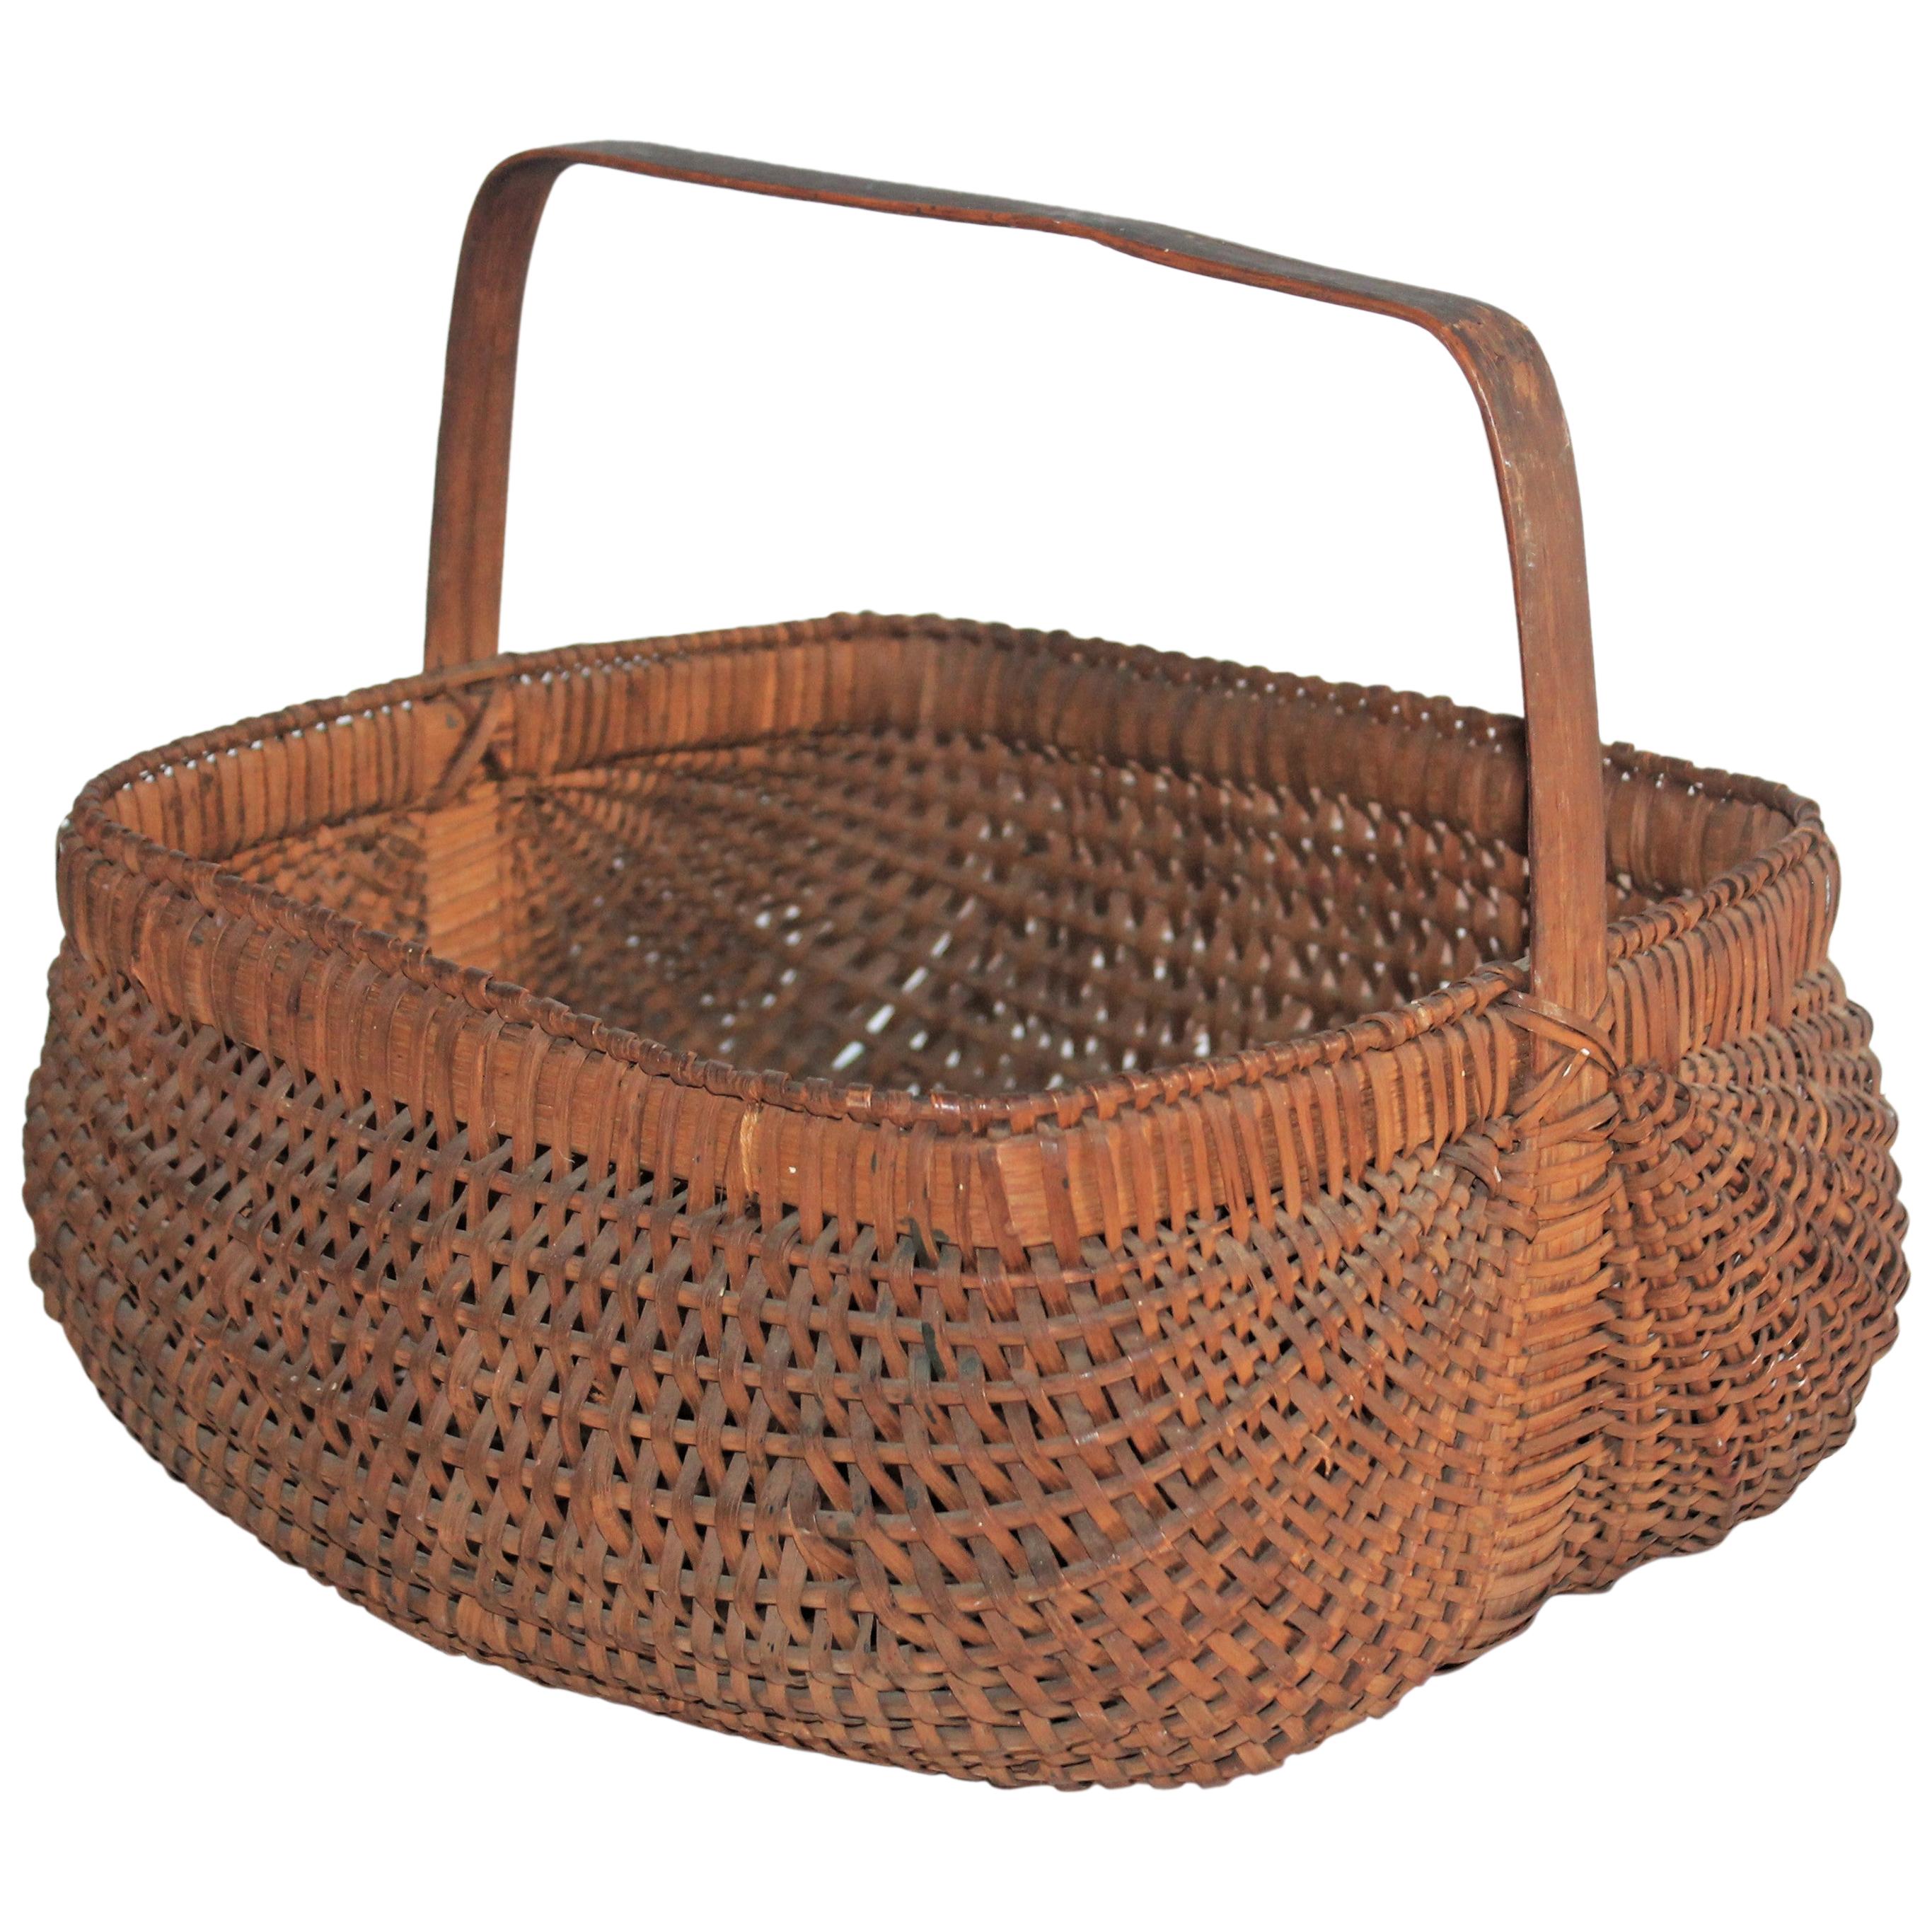 19th Century Early Tight Buttocks Basket